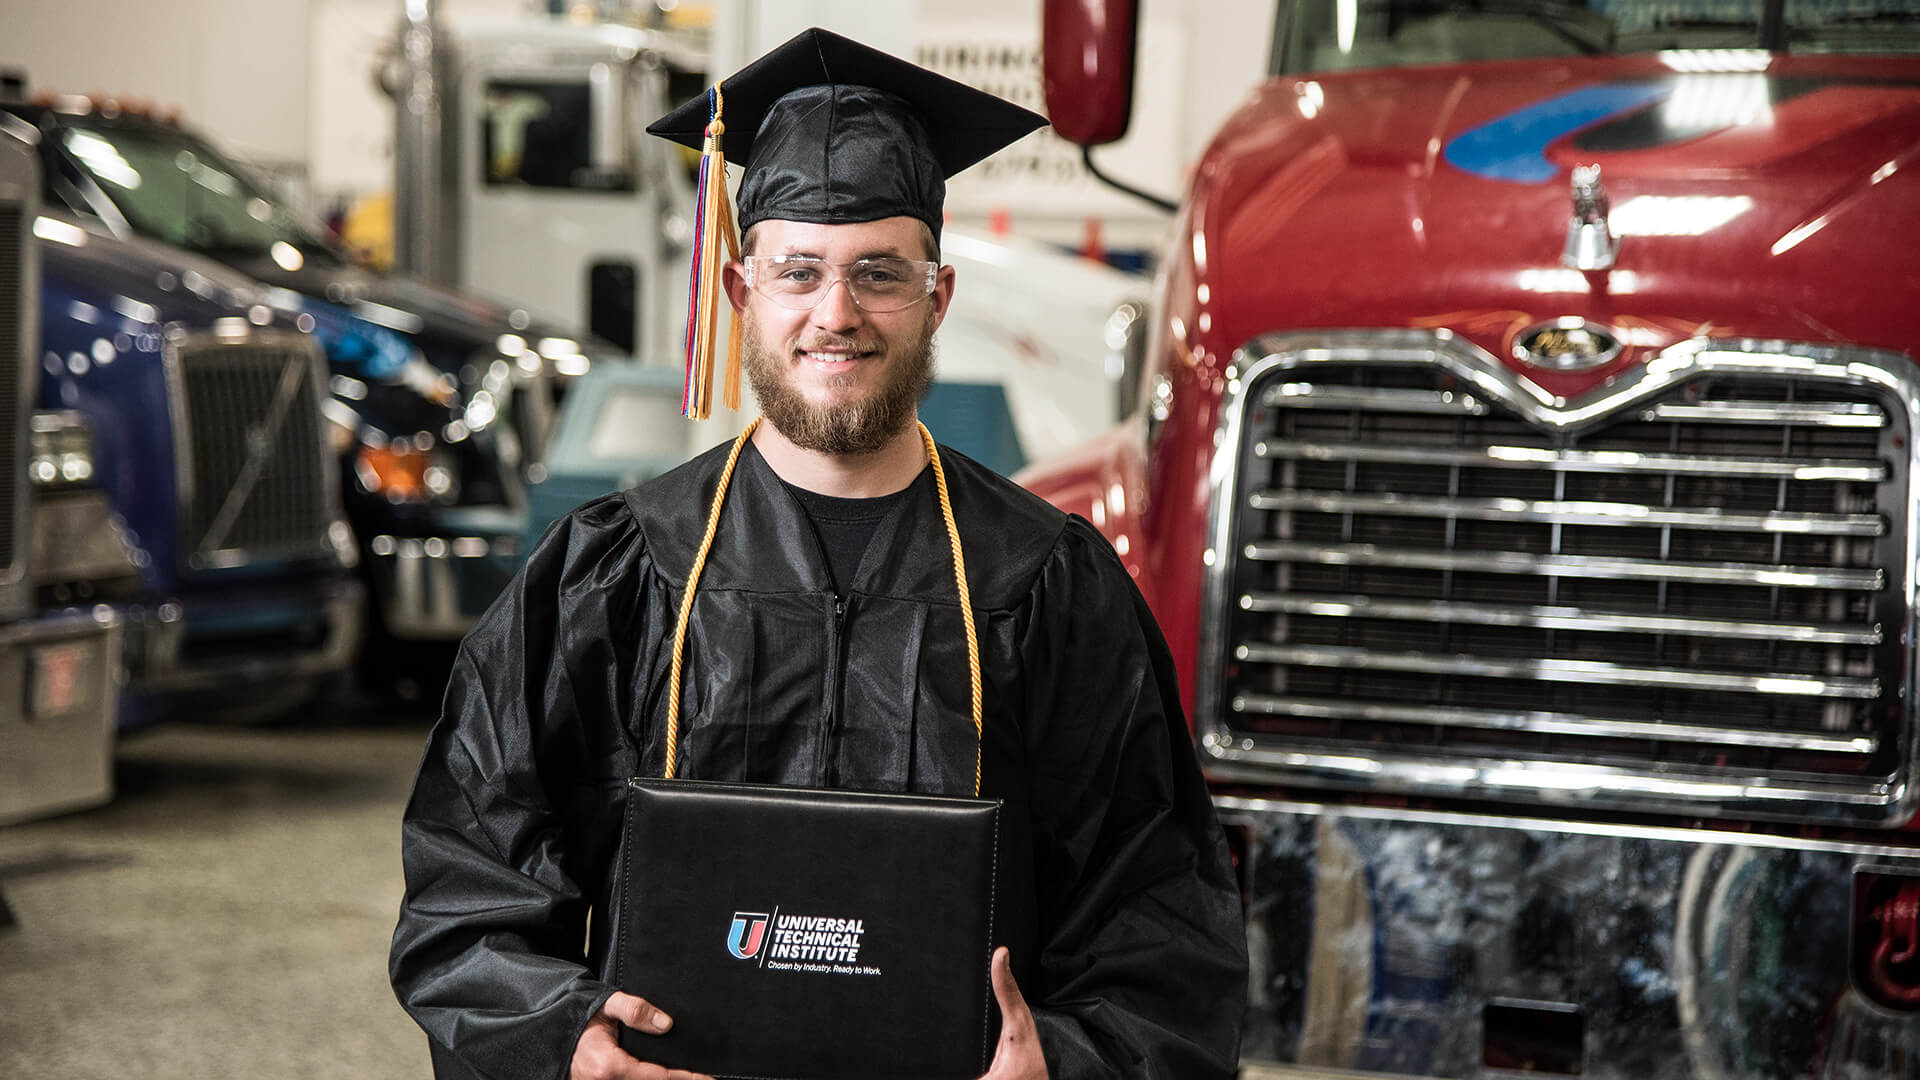 UTI student in a cap and gown holding a diploma smiling with diesel trucking in the background